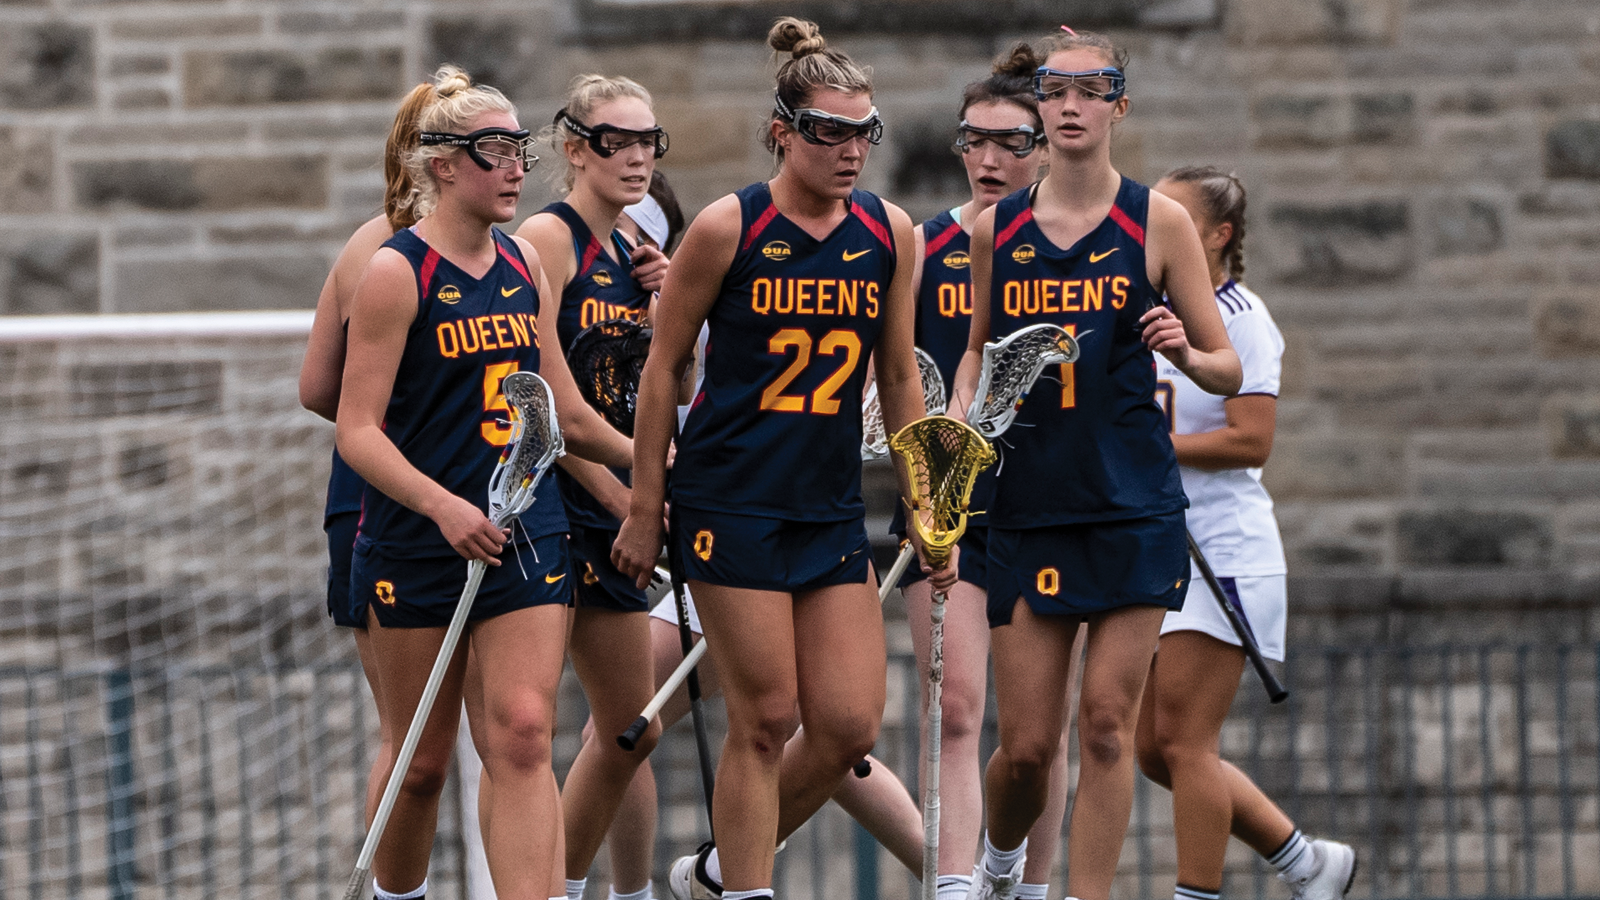 Five members of the Queen's women's lacrosse team walking collectively together after a goal